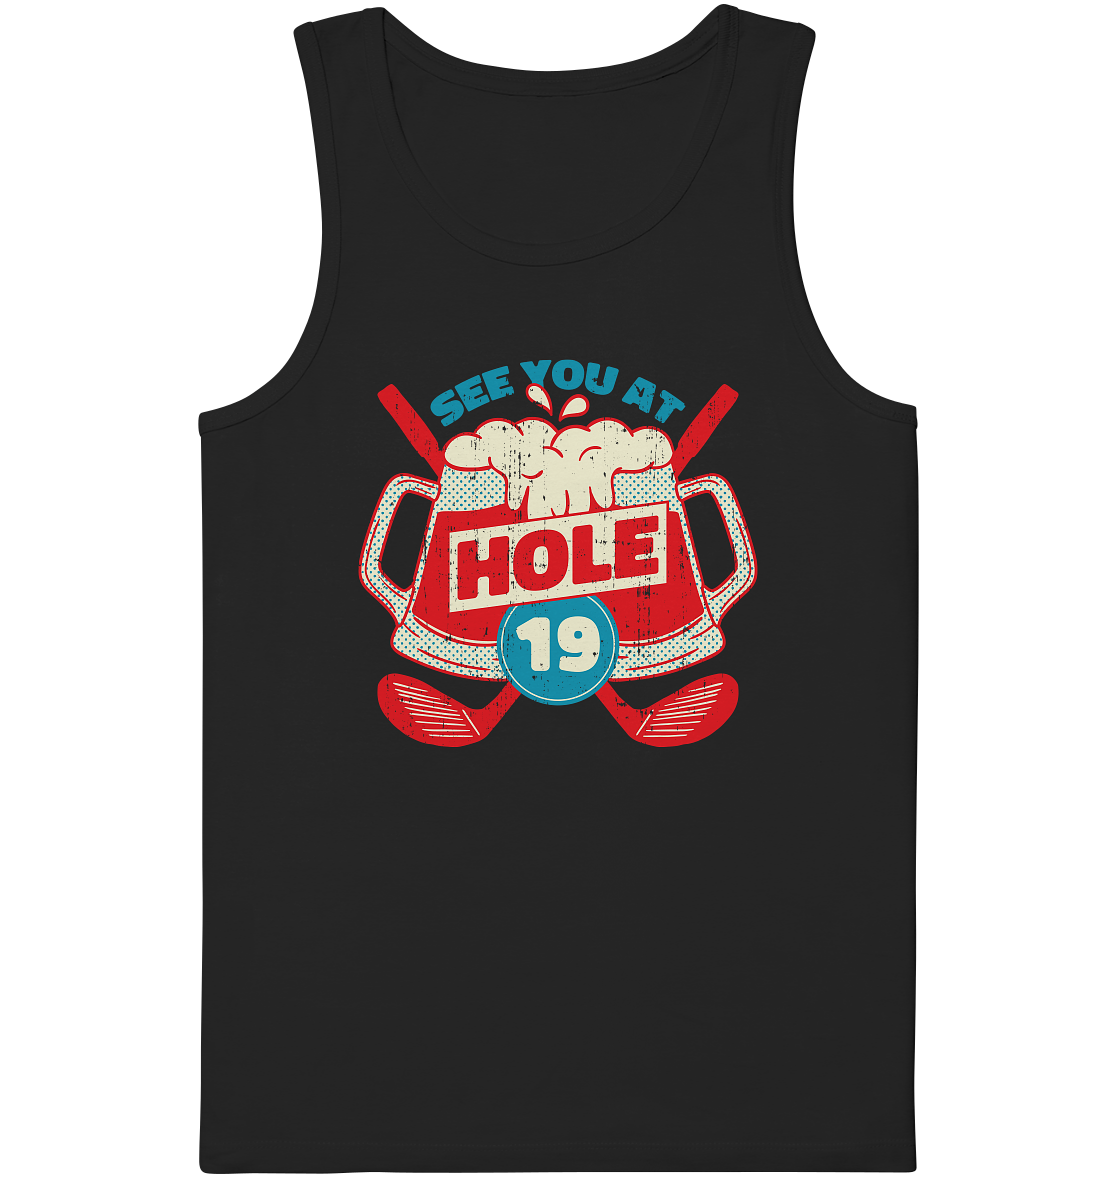 Golf ,See you at Hole 19 , Wir sehen uns bei Loch 19 - Organic Tank-Top